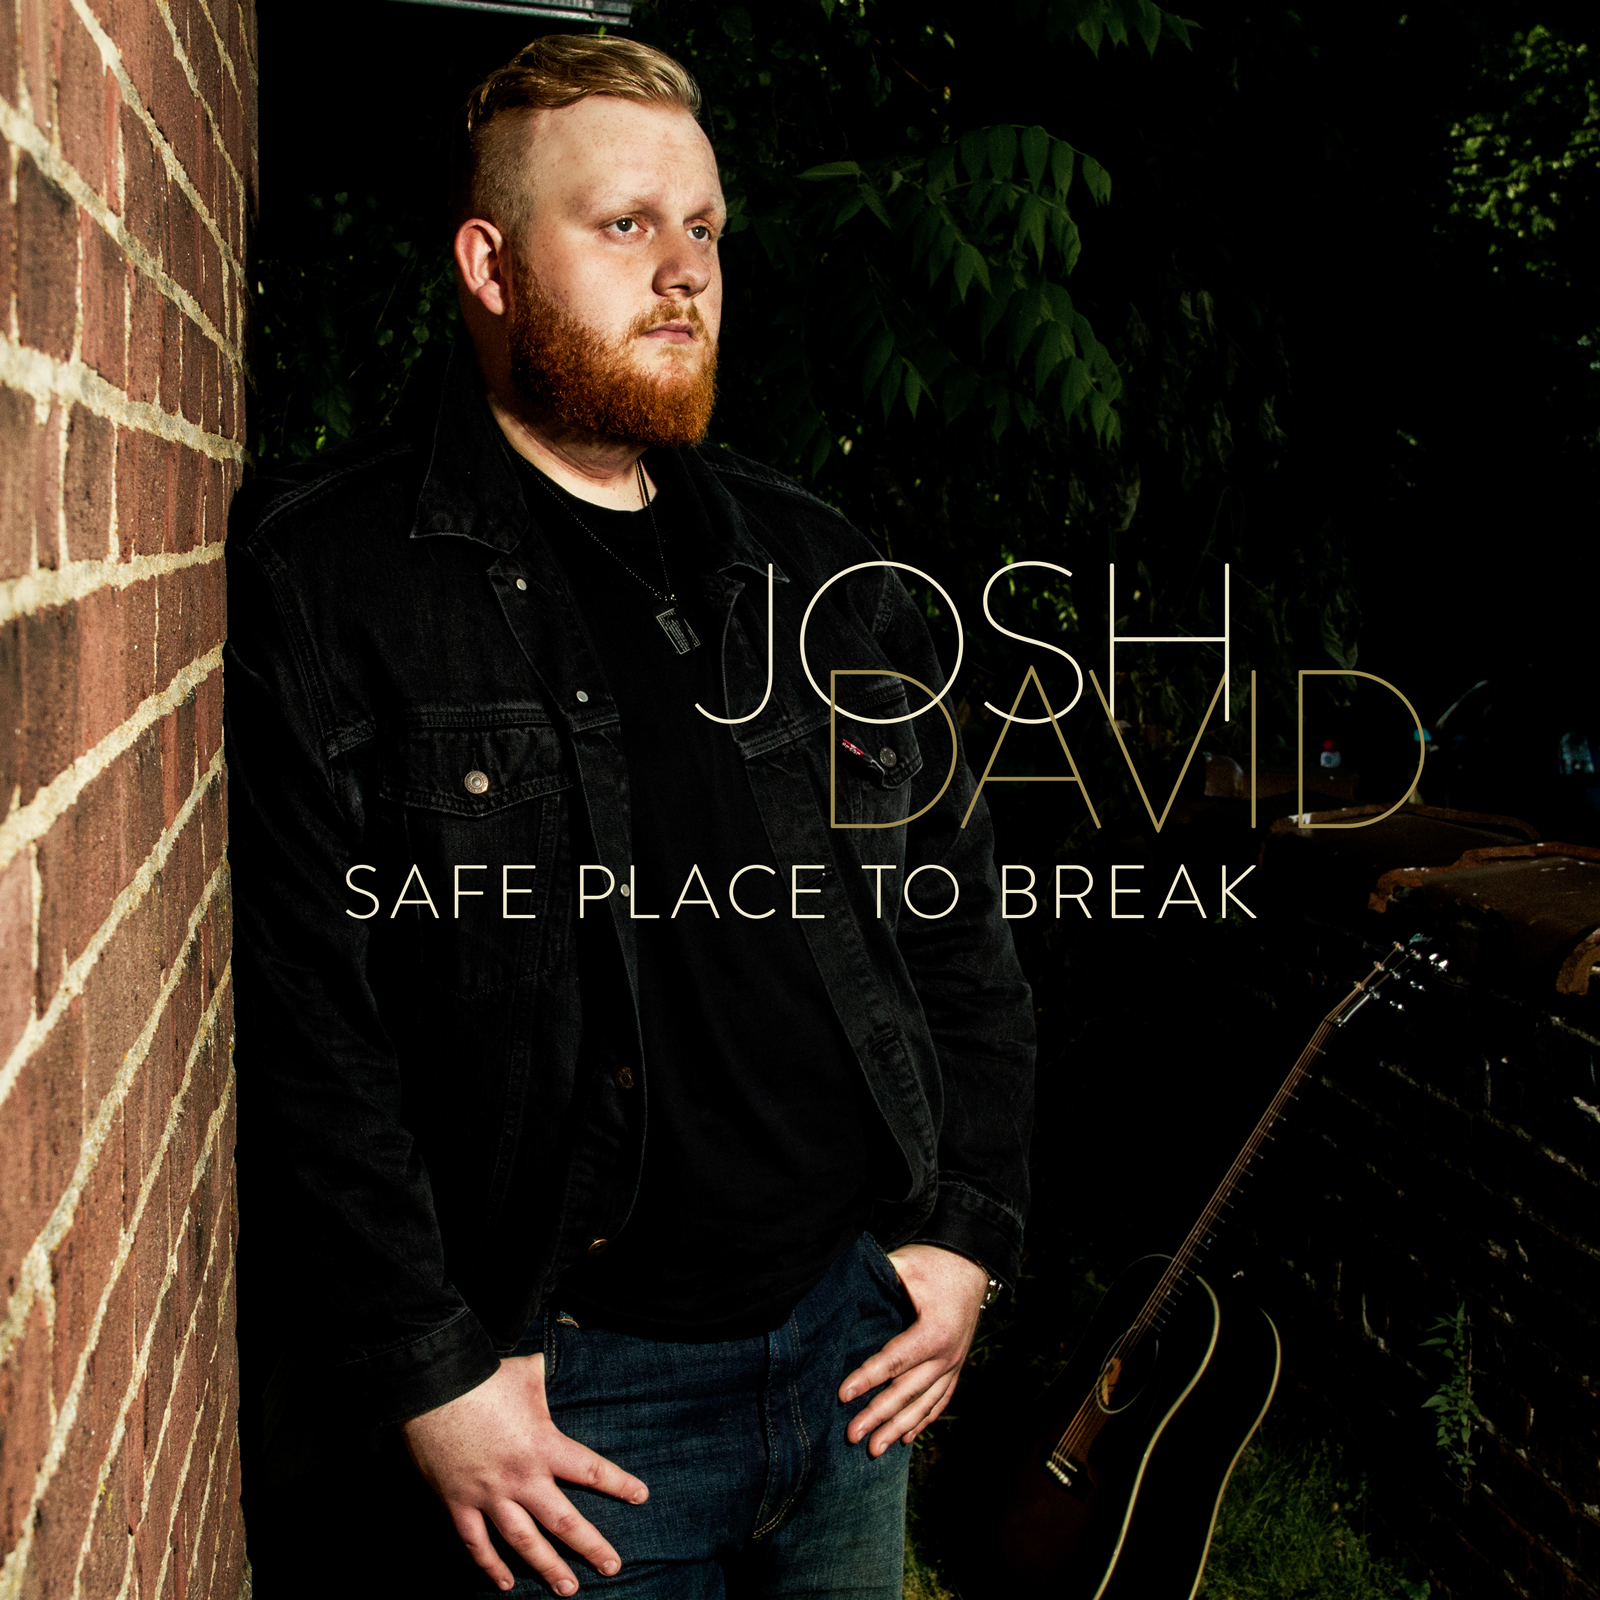 RISING COUNTRY ARTIST JOSH DAVID MAKES DEBUT WITH EMOTIONAL RELEASE “SAFE PLACE TO BREAK”